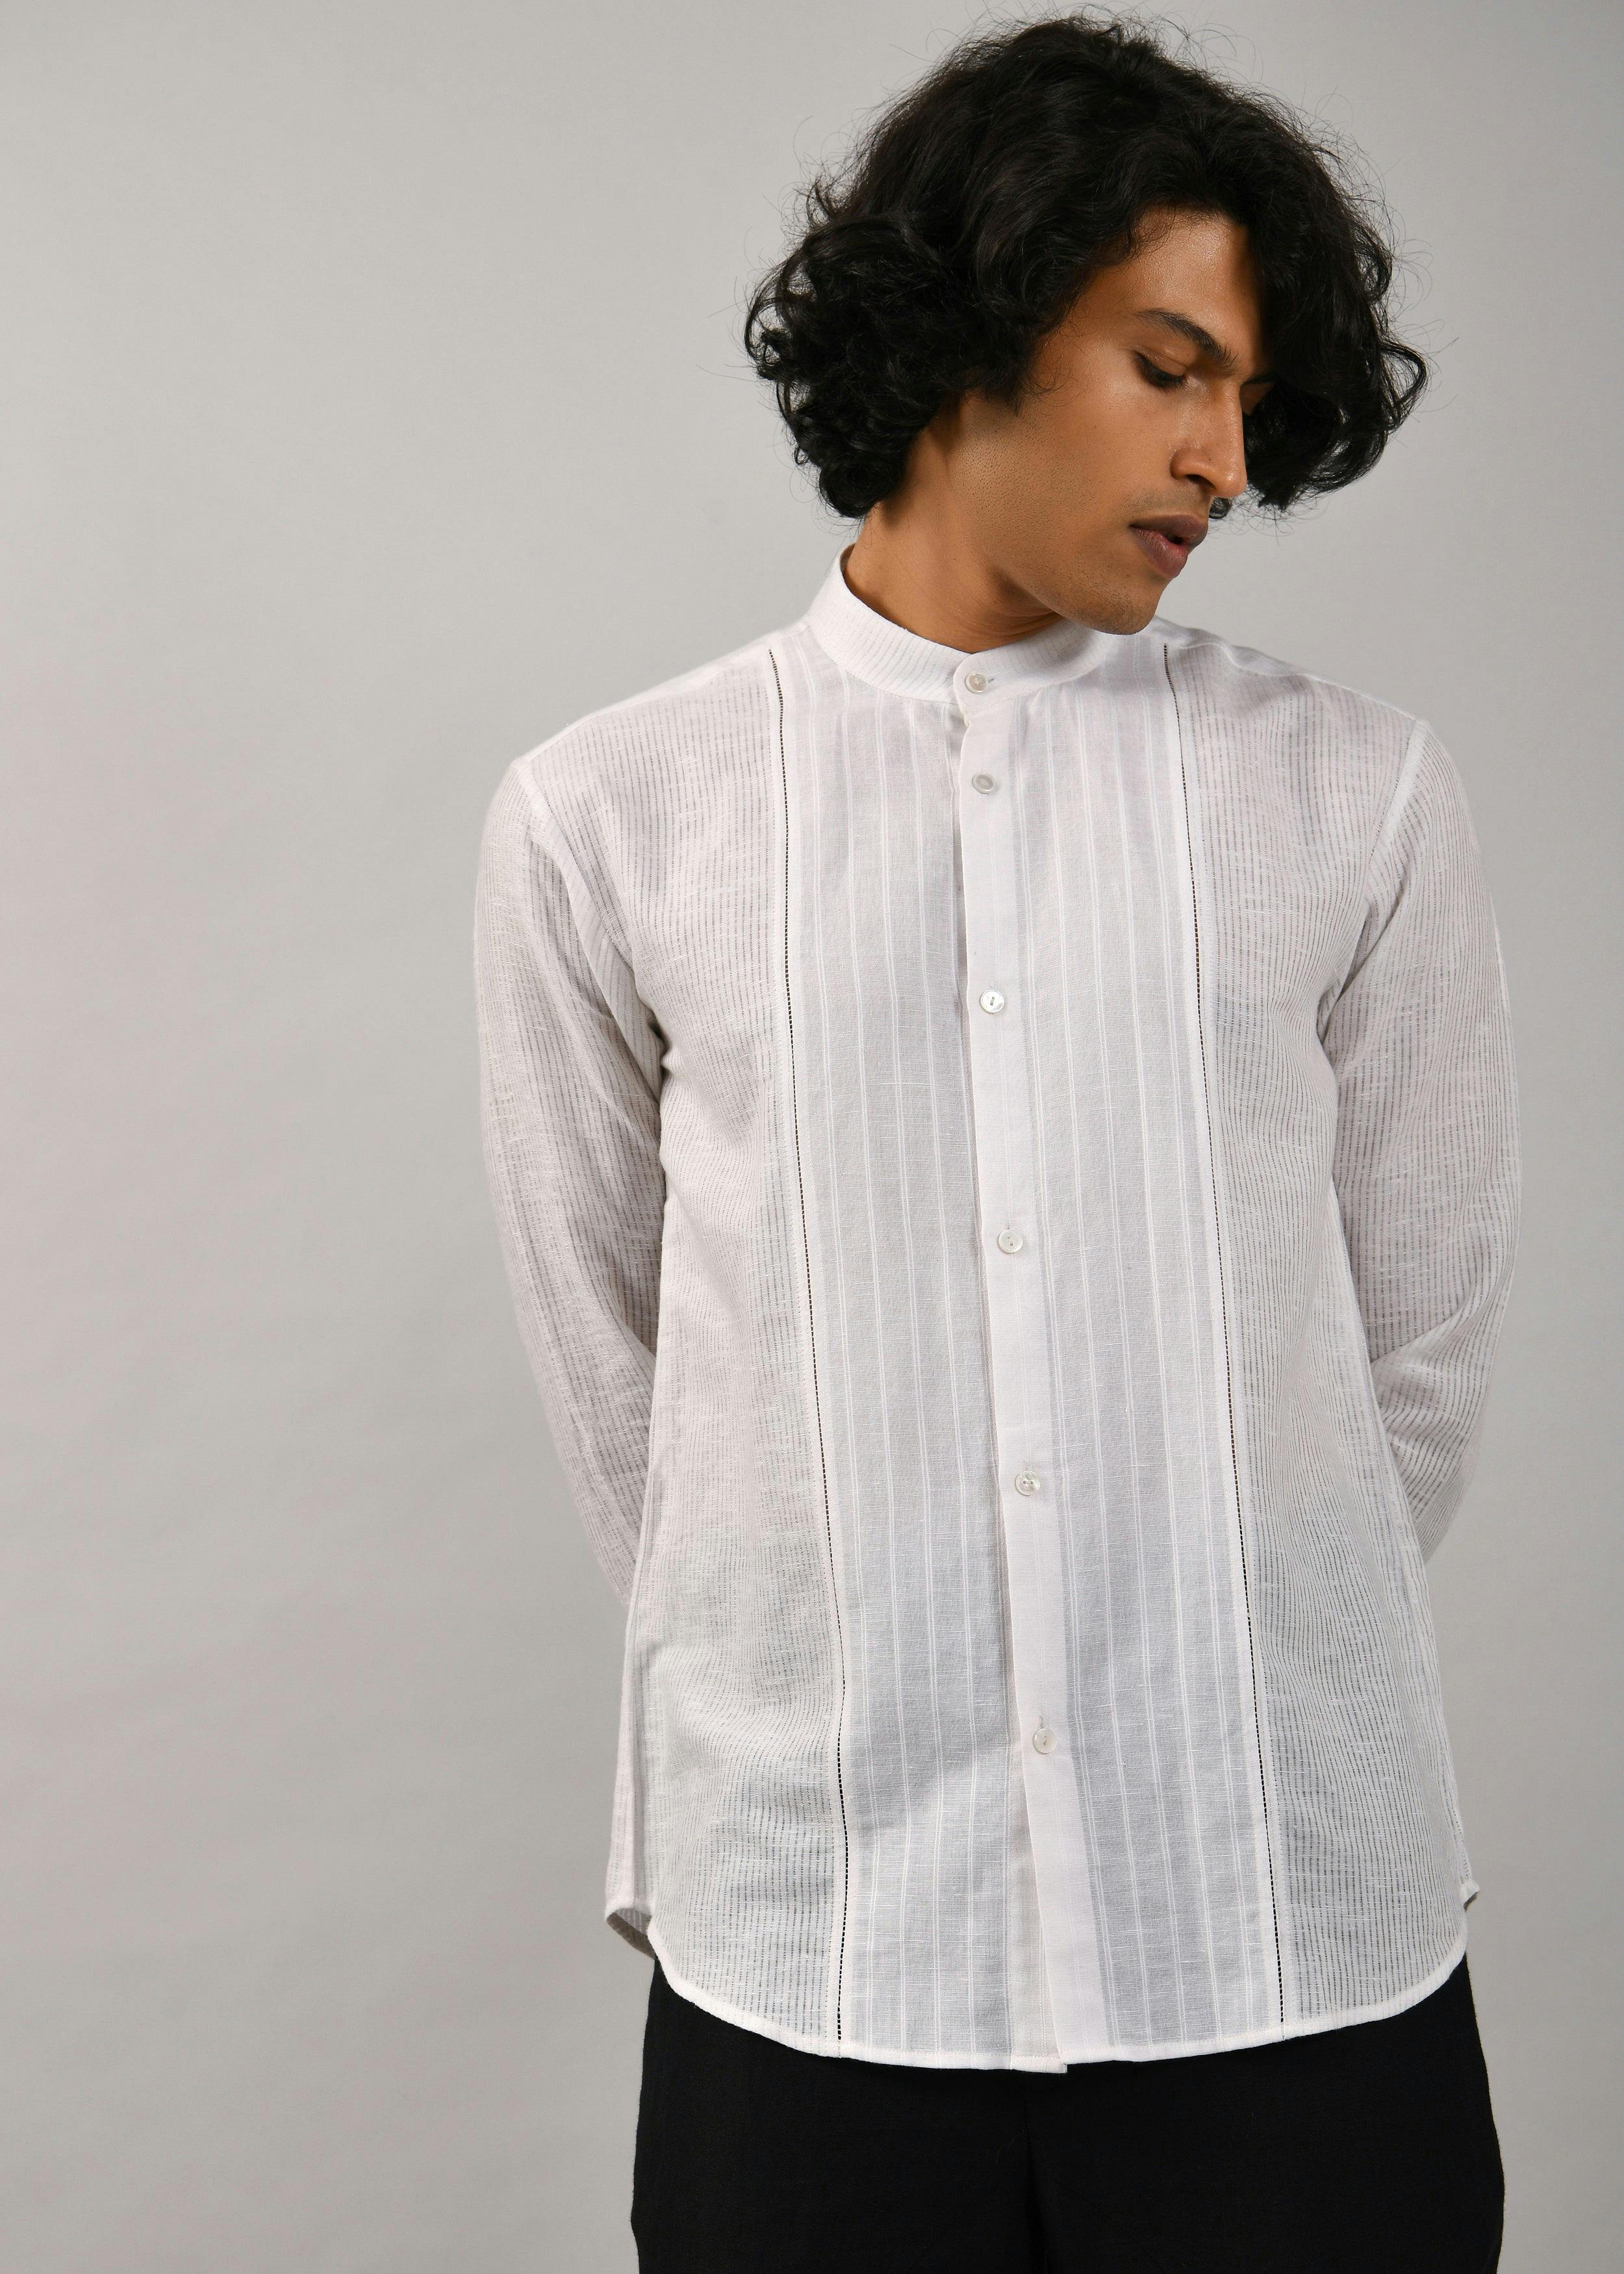 Linen Panel Shirt, a product by Country Made